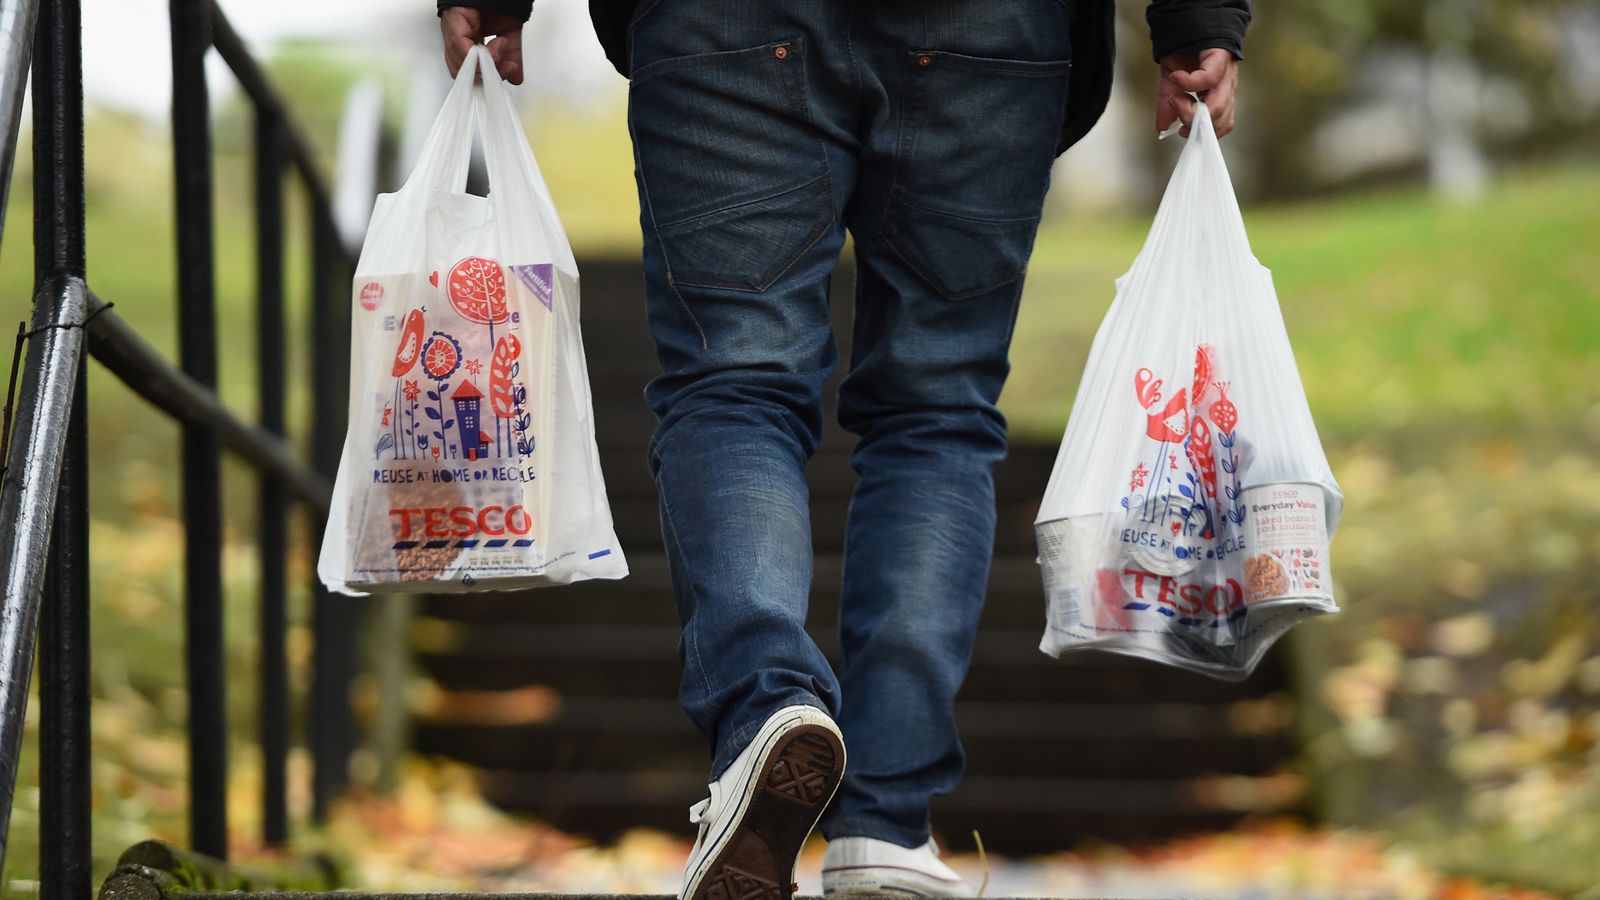 Tesco to scrap single use plastic bags  in all stores 